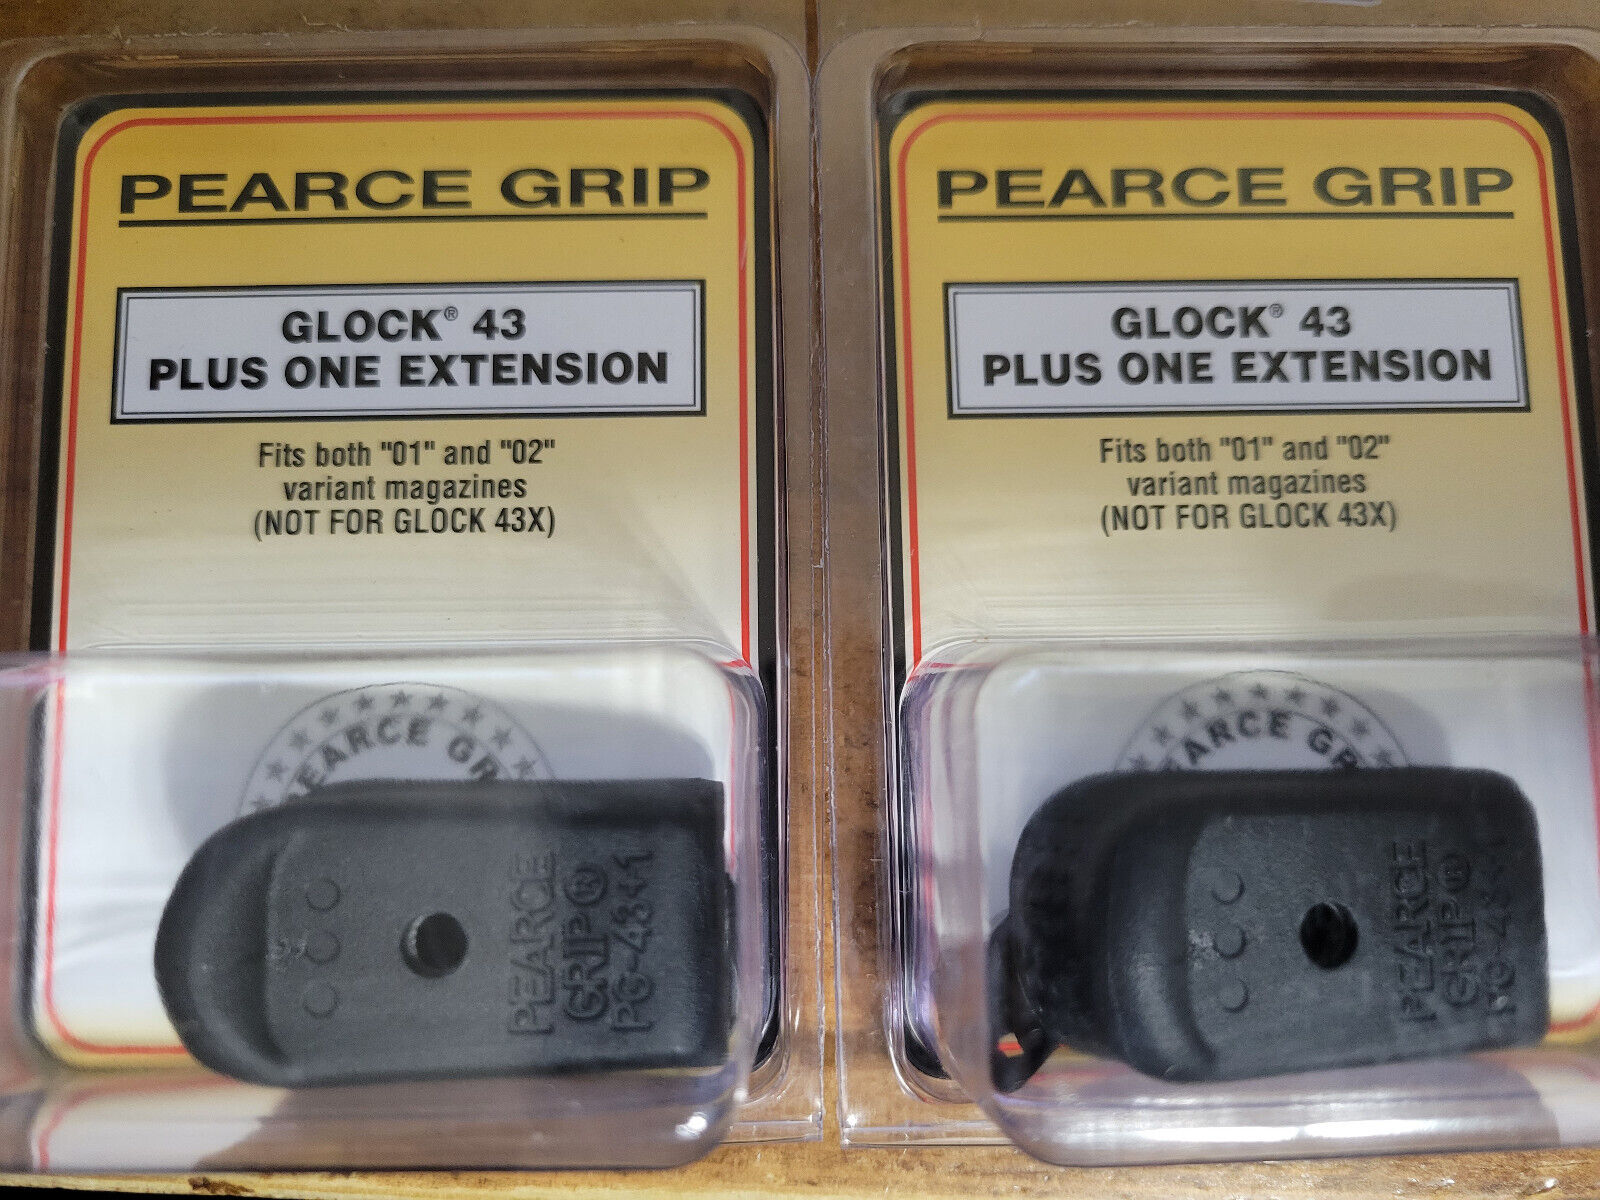 Lot of 2 - Pearce Grip Glock 43 Plus 1 Magazine Extension PG-43+ G43 Mag Ext Pearce Grip PG-43+1